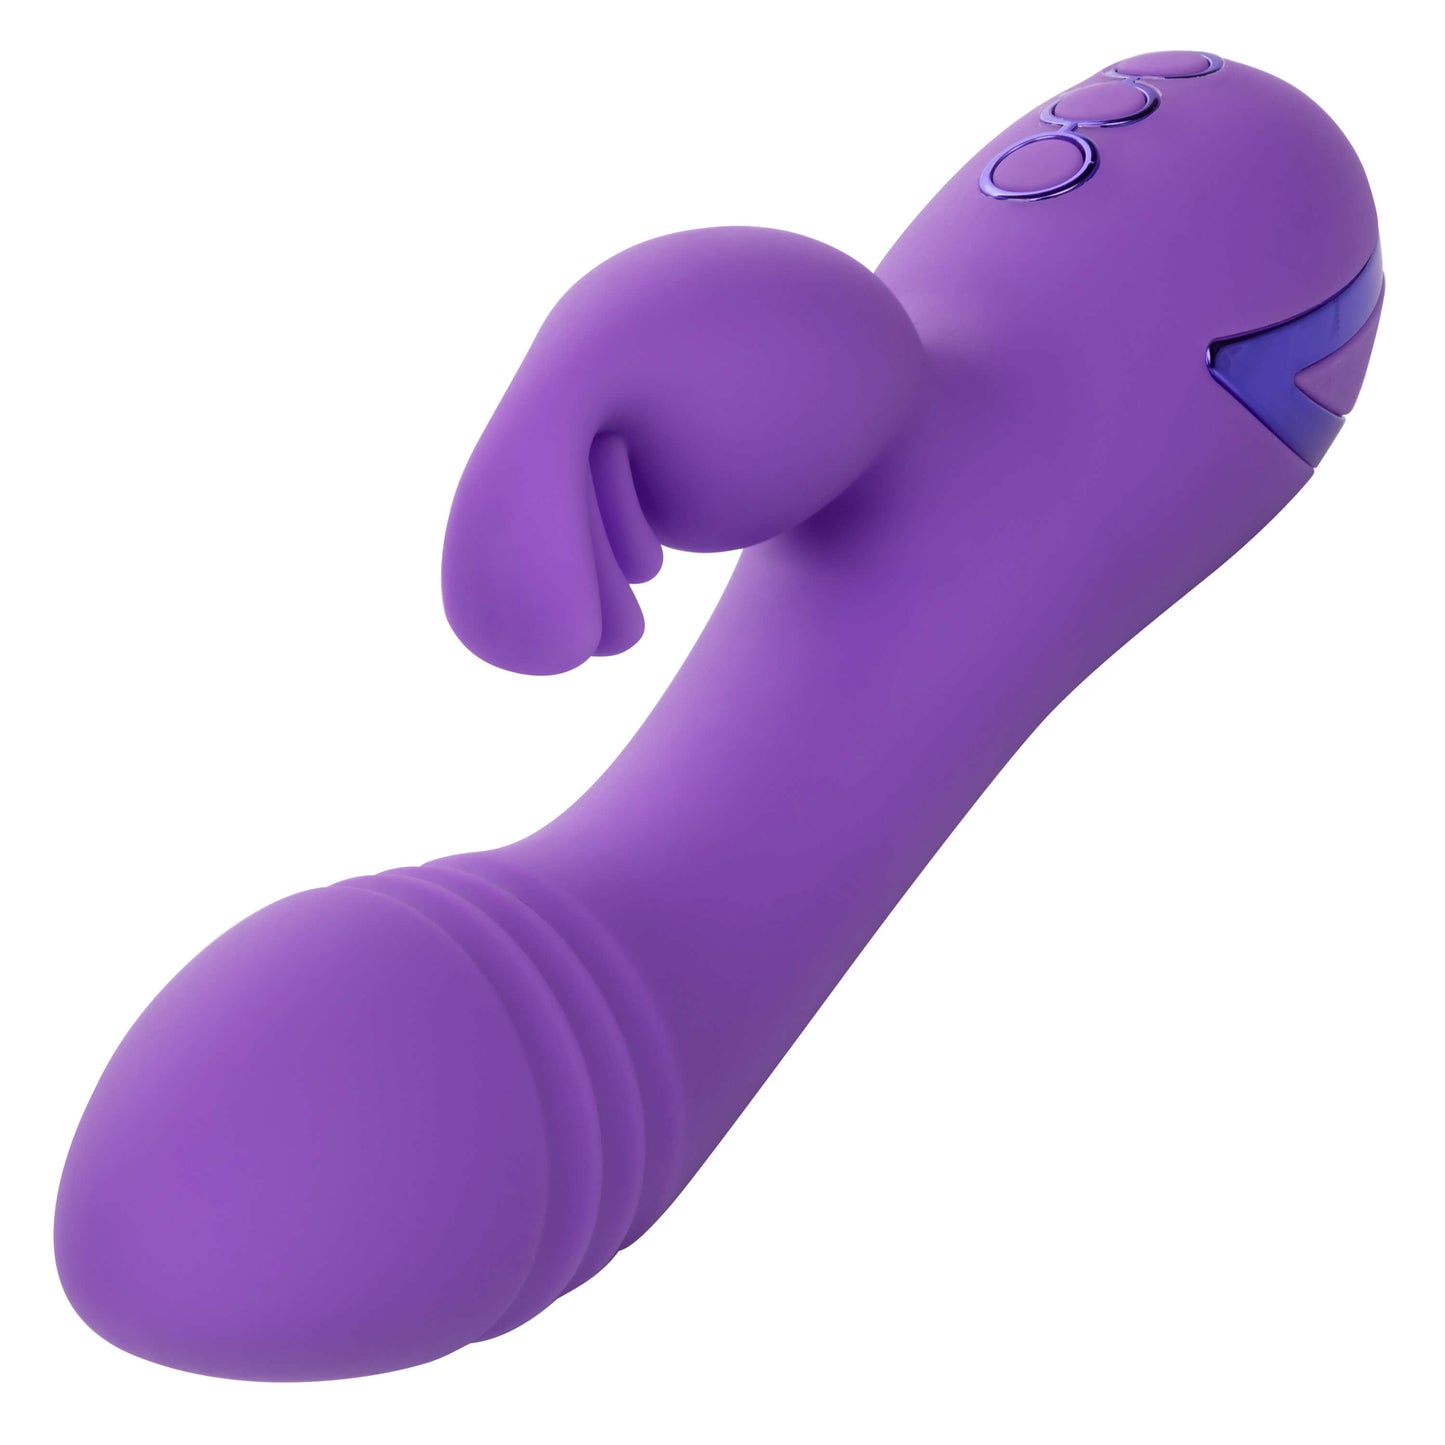 CalExotics California Dreaming West Coast Wave Rider - The Bigger O - online sex toy shop USA, Canada & UK shipping available